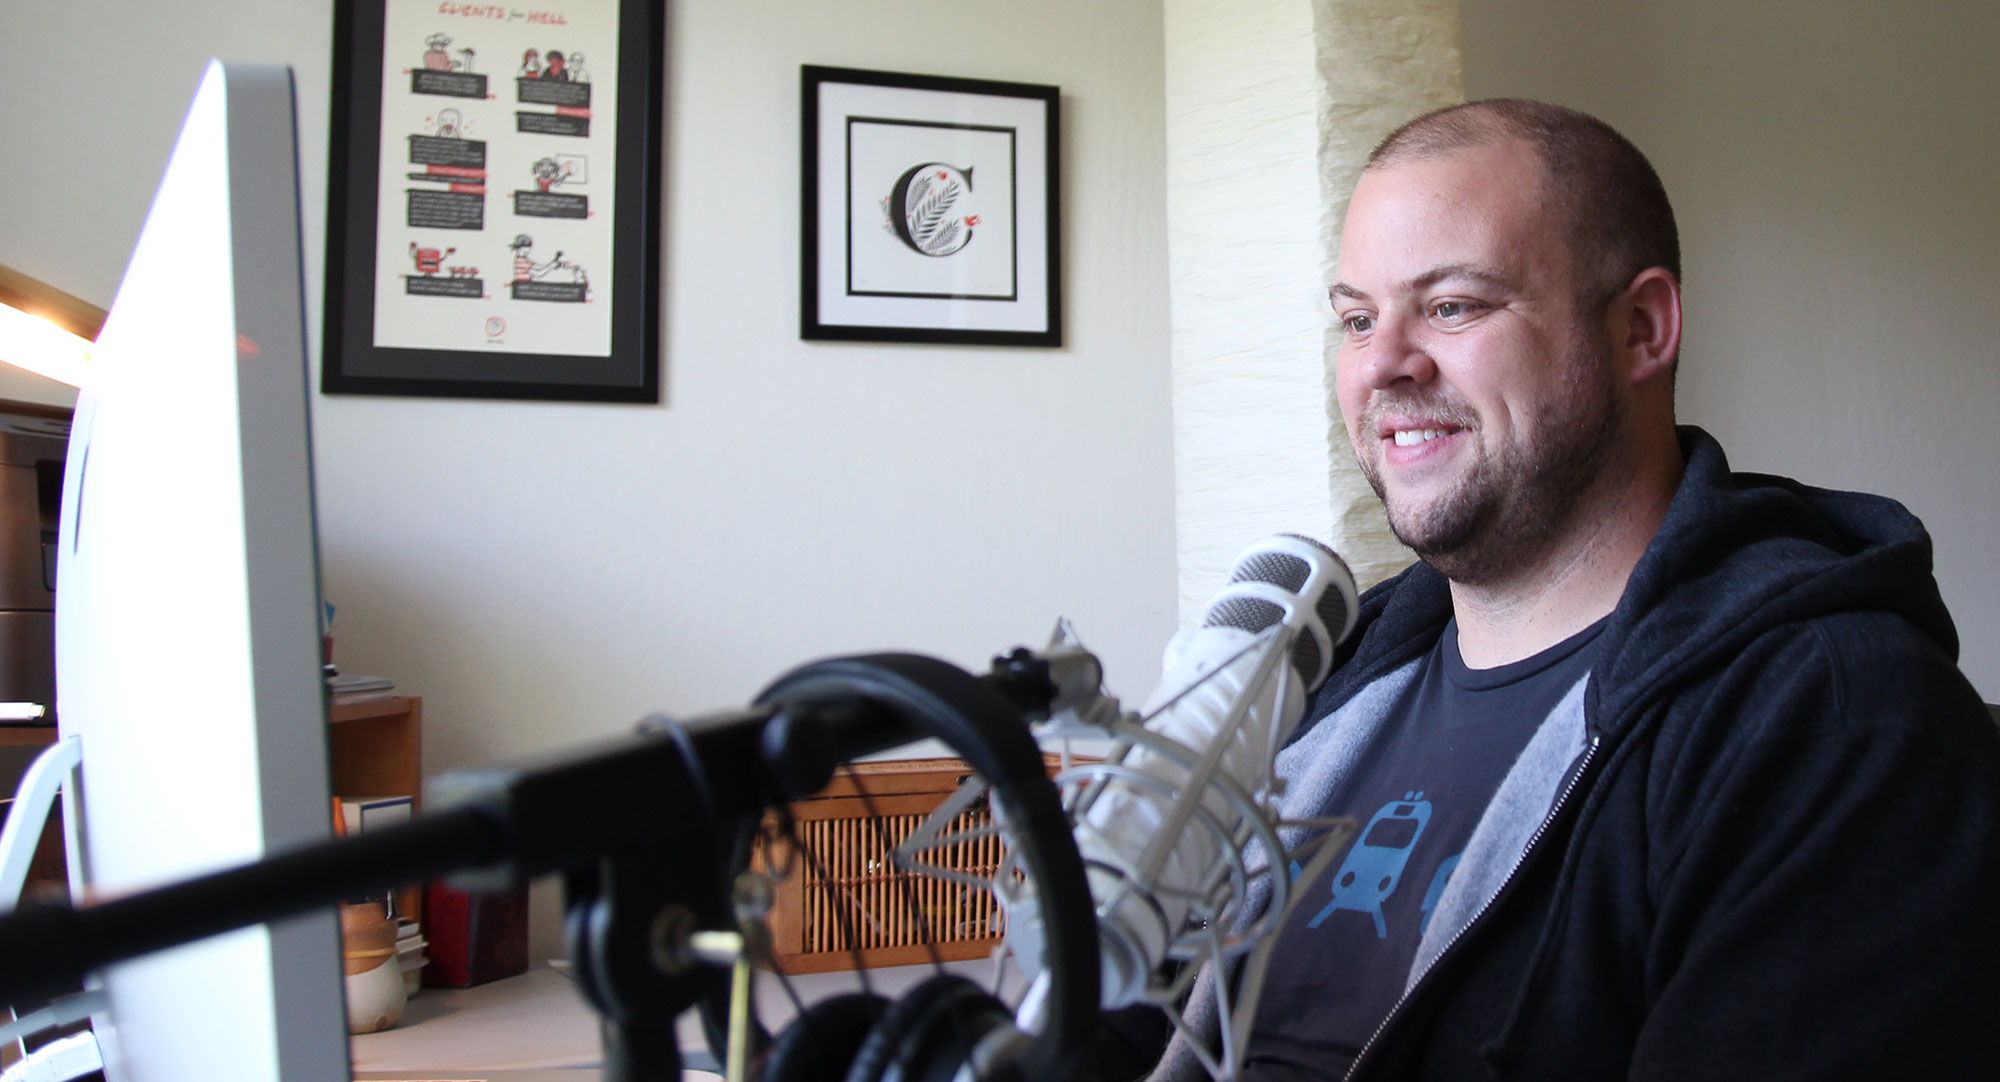 Chris Coyier on WordPress, business, and building the web